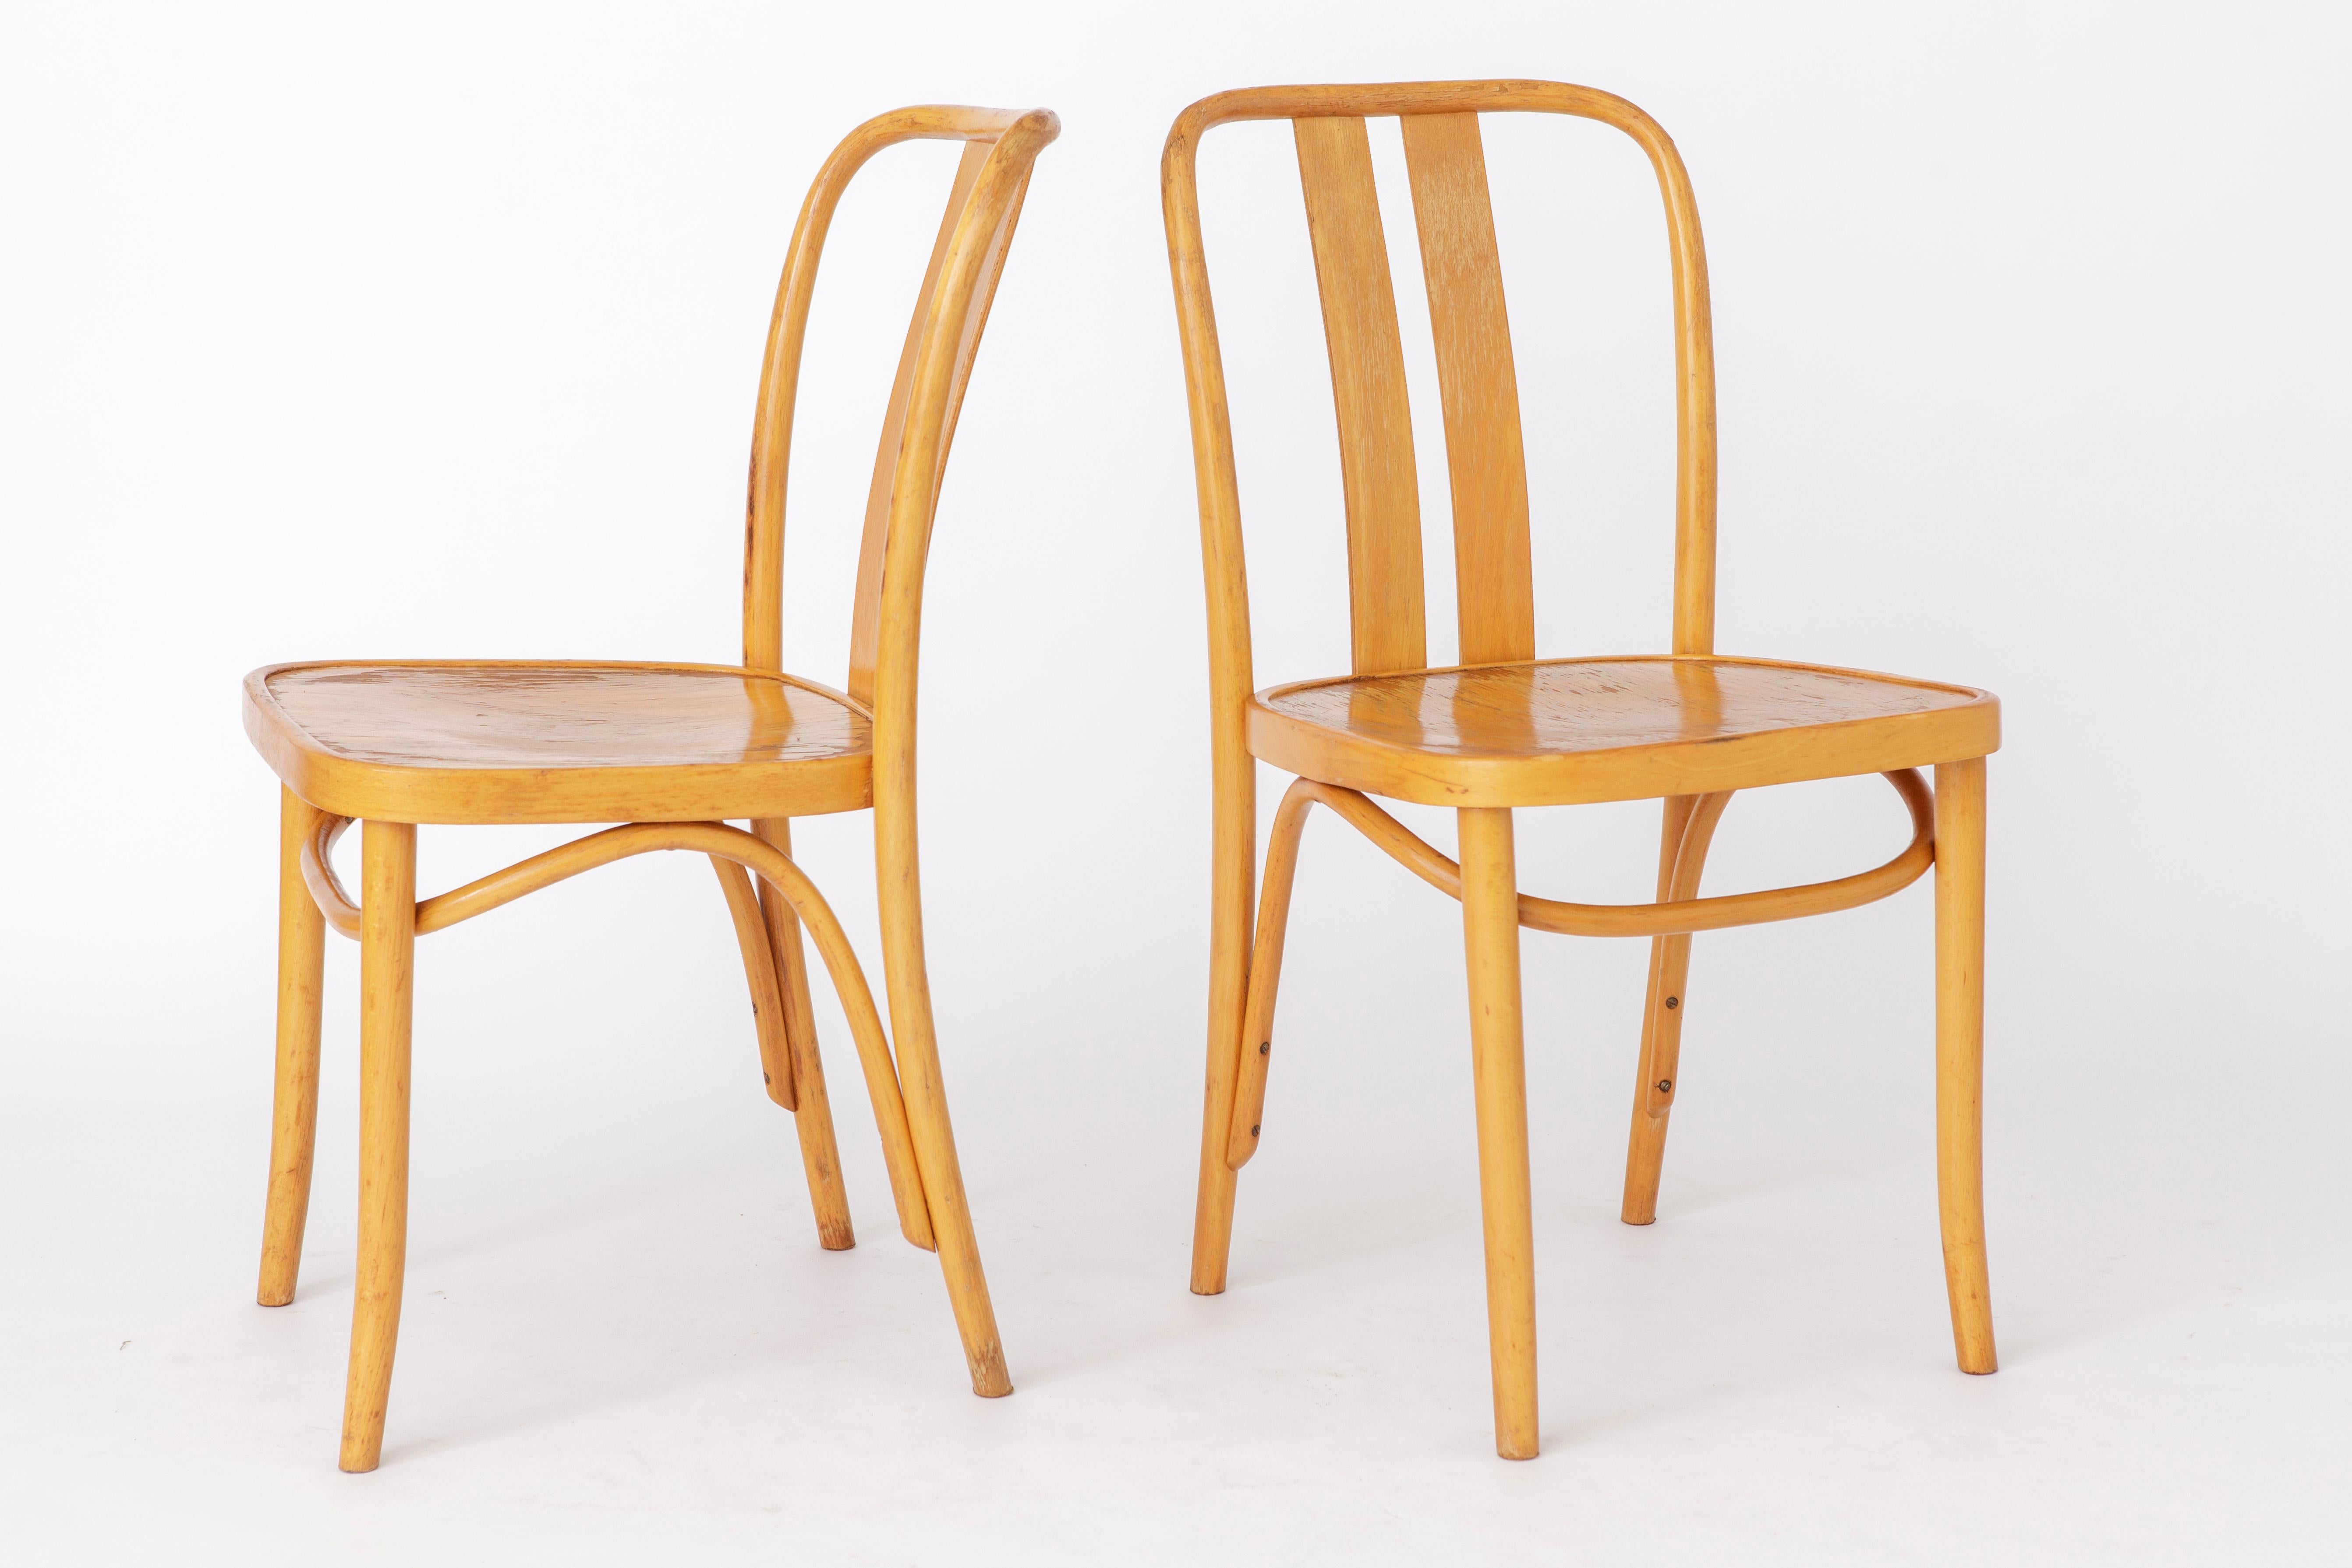 Pair of IKEA chairs from the 1970s. 
Model: Lena. Manufacturer: Radomsko. 
Designer: ERIK WØRTS. 
Displayed price is for 2 chairs. Totally up to 3 chairs available. 

Fair vintage condition. Sturdy beech wood frames. 
Surface was refurbished and